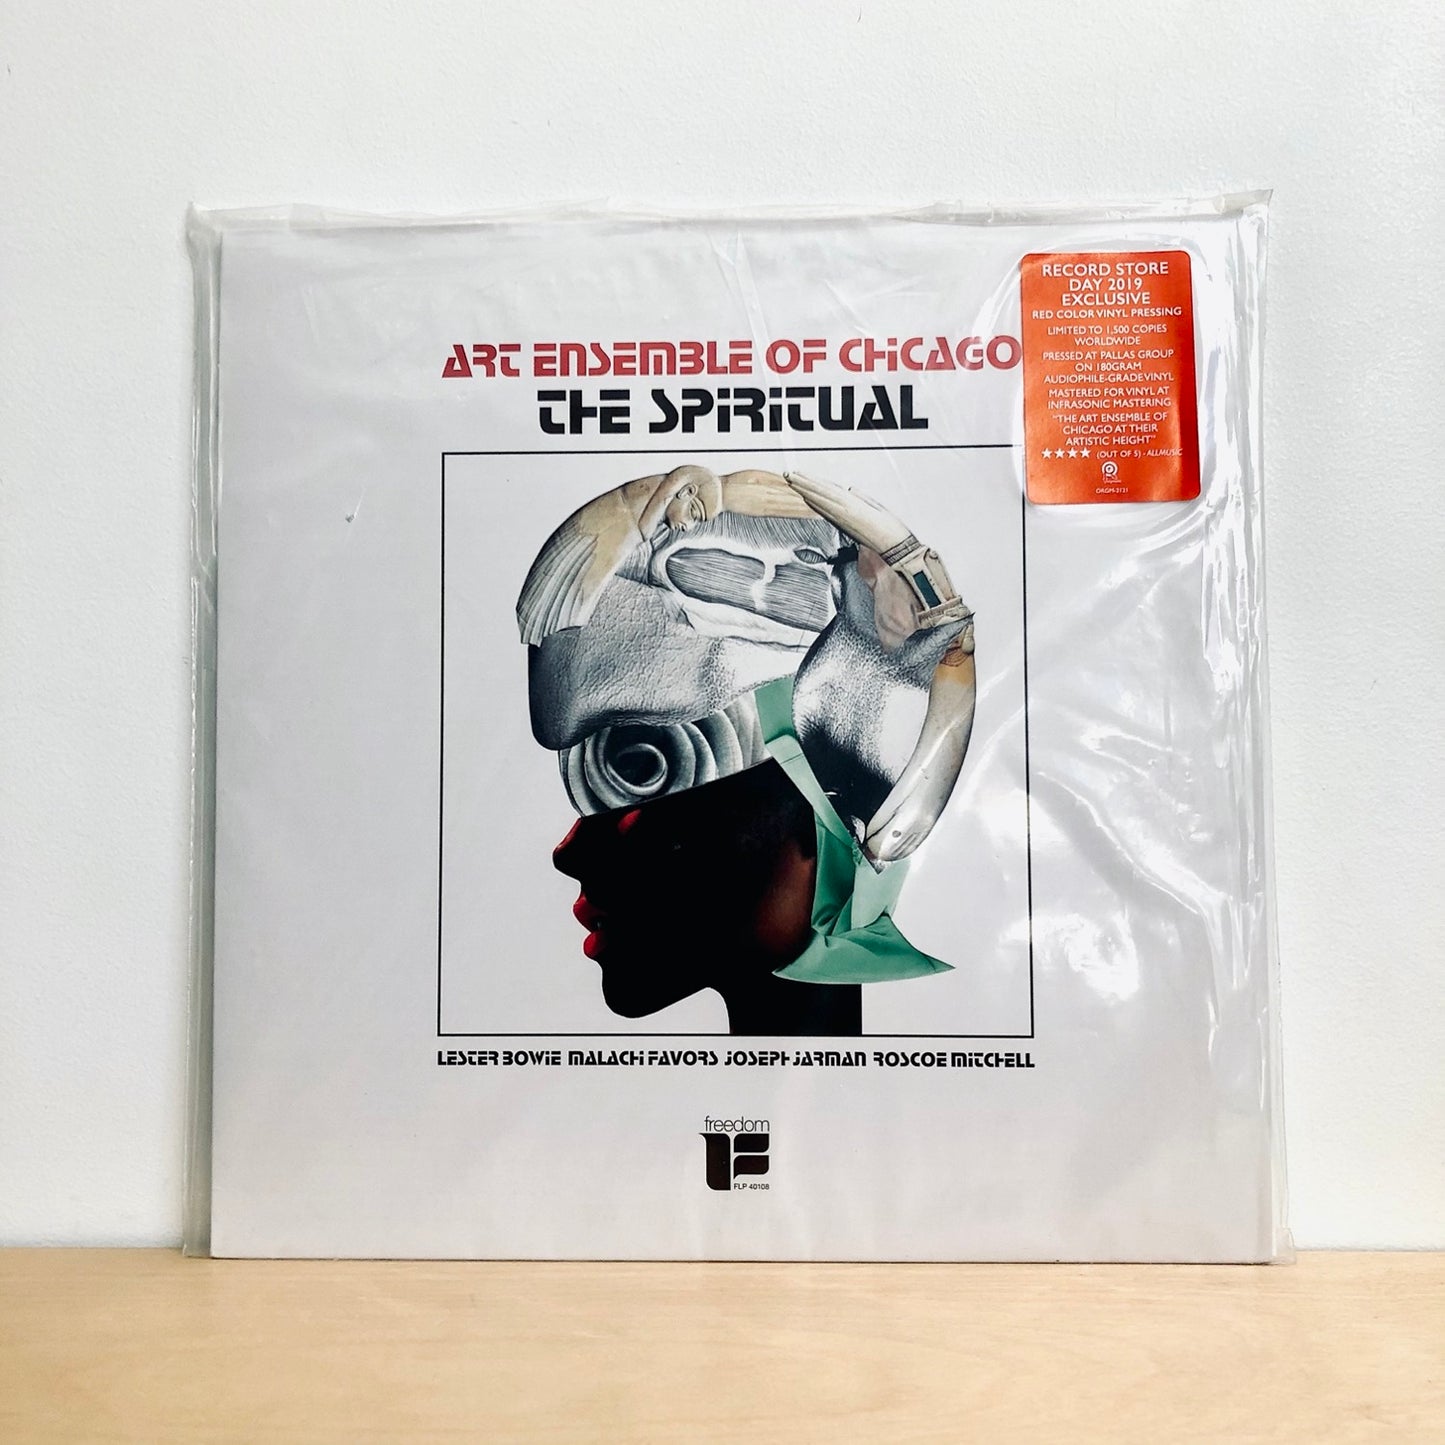 Load image into Gallery viewer, RSD - The Art Ensemble of Chicago - The Spiritual [LP](180 Gram, Transparent Red Vinyl, new cover art, limited to 1500, indie exclusive)
